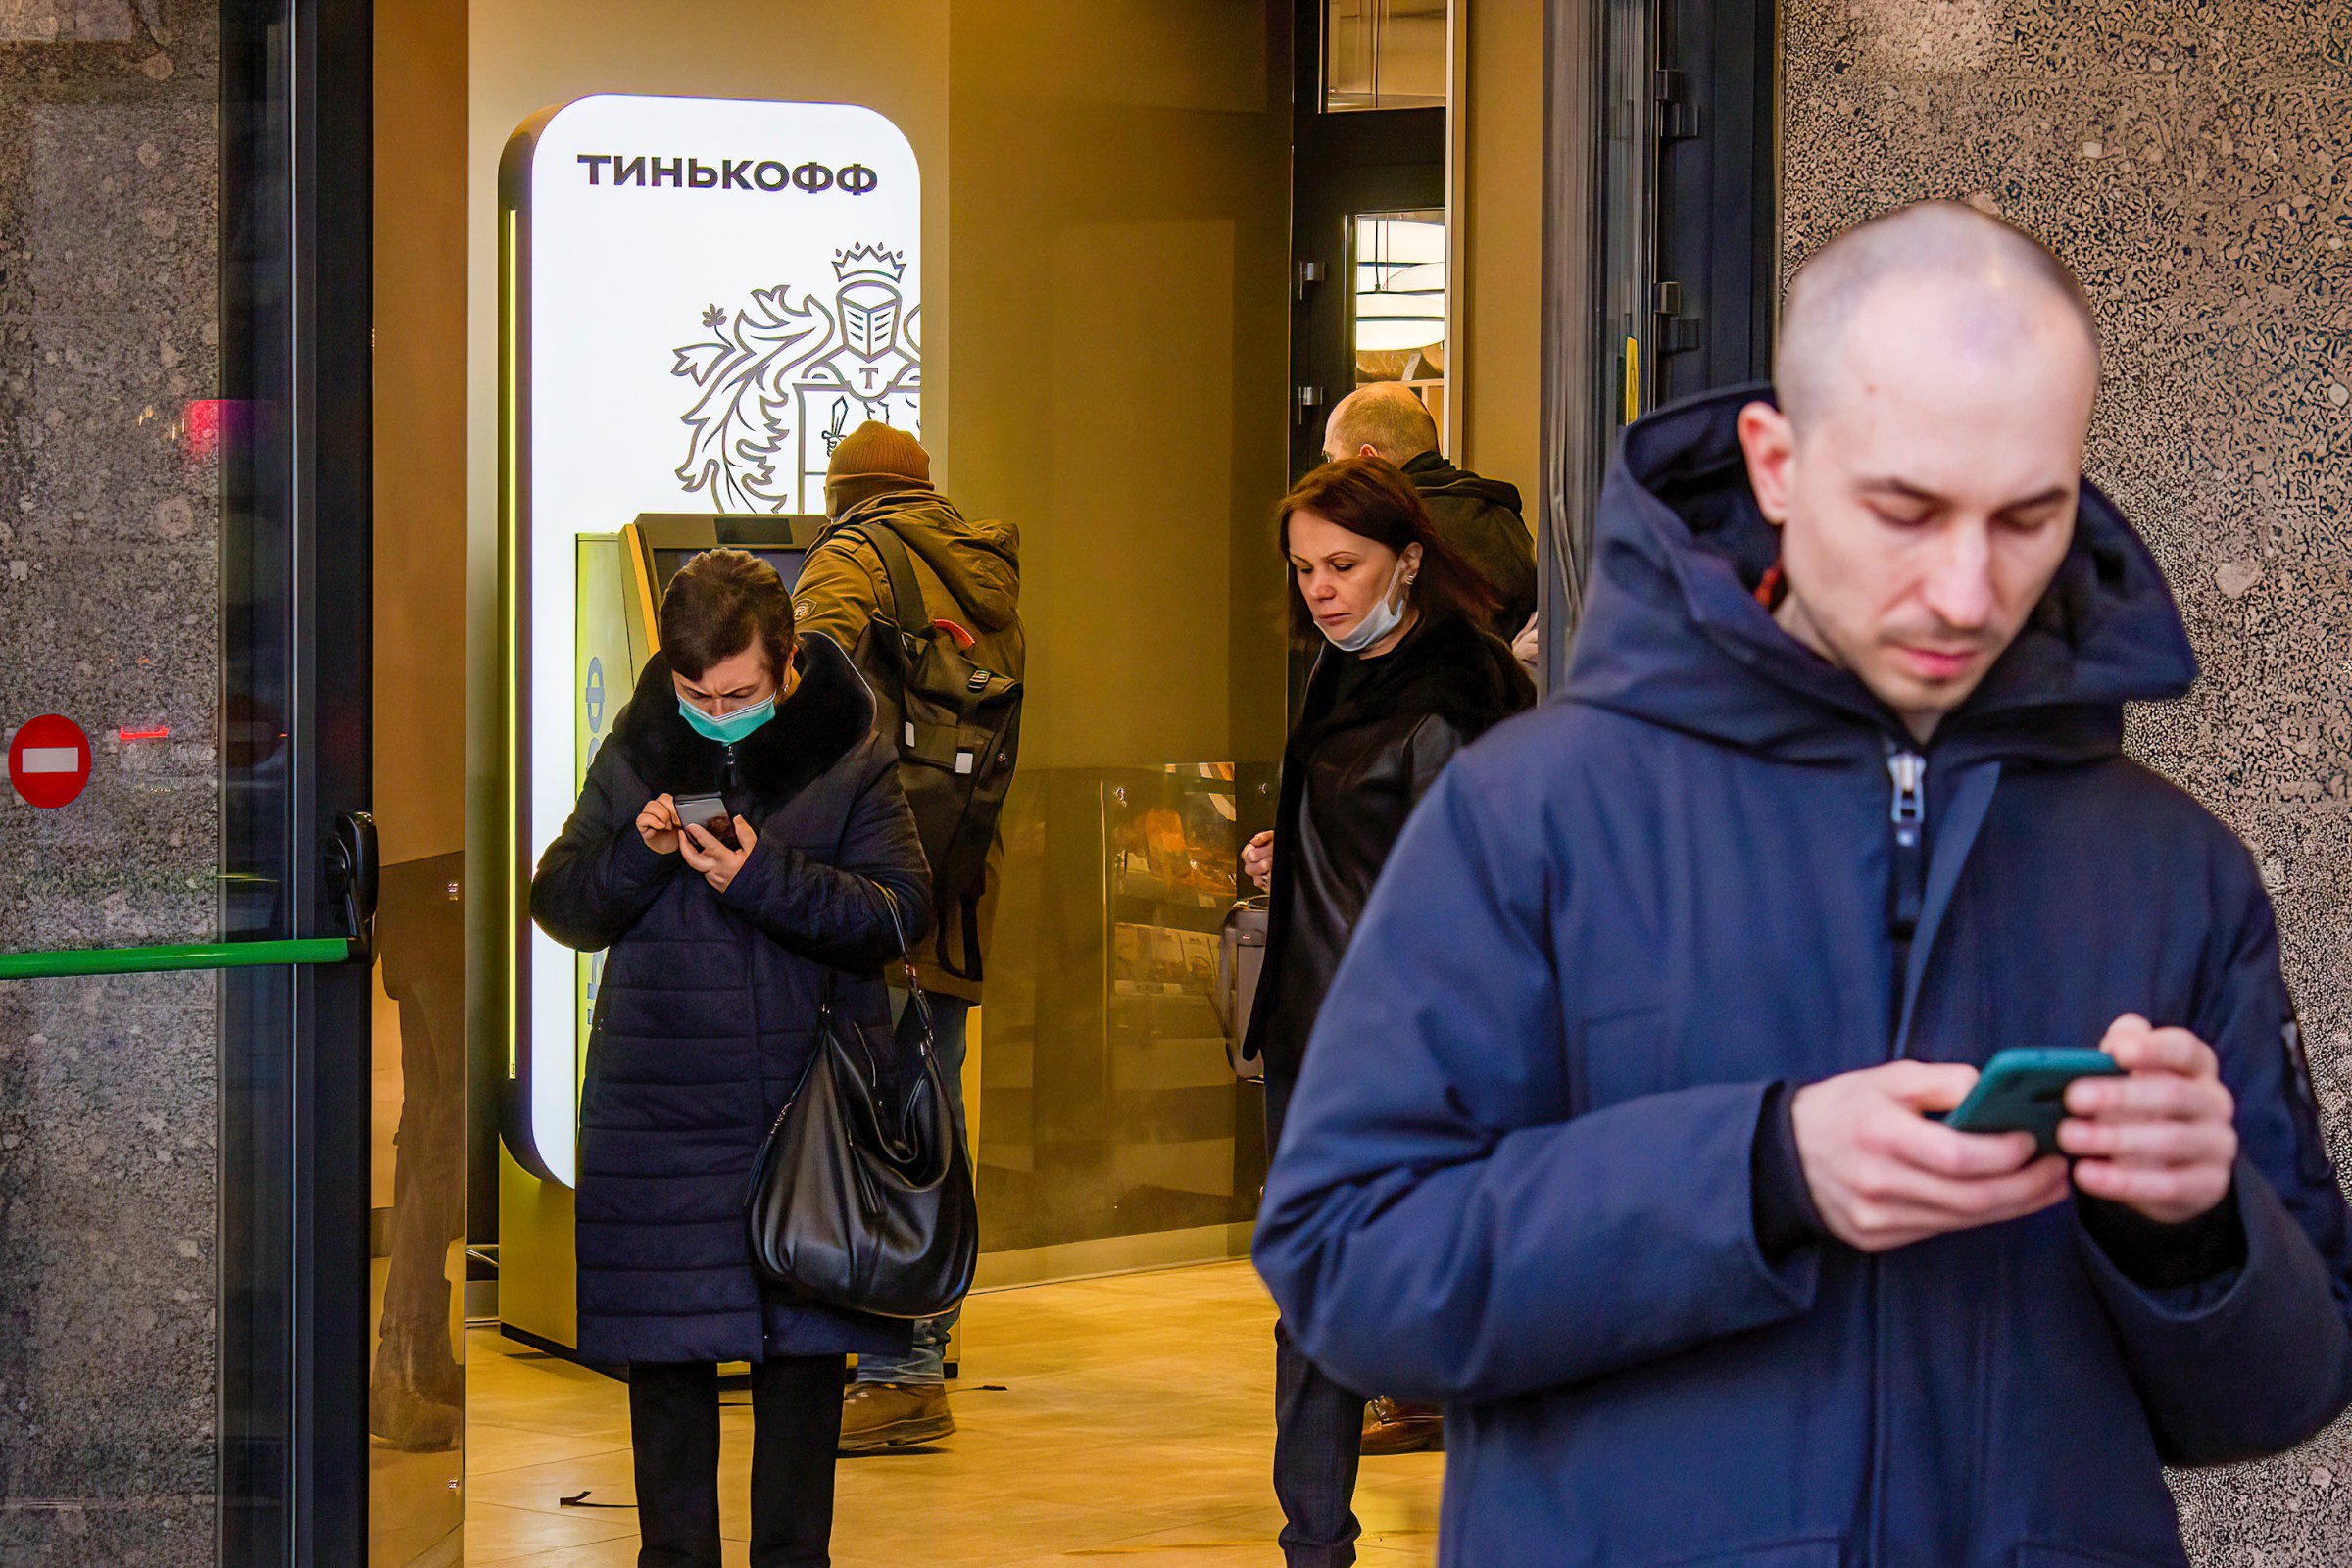 People in Moscow check the Tinkoff app on their phones to find out where they can withdraw US dollars on March 3.